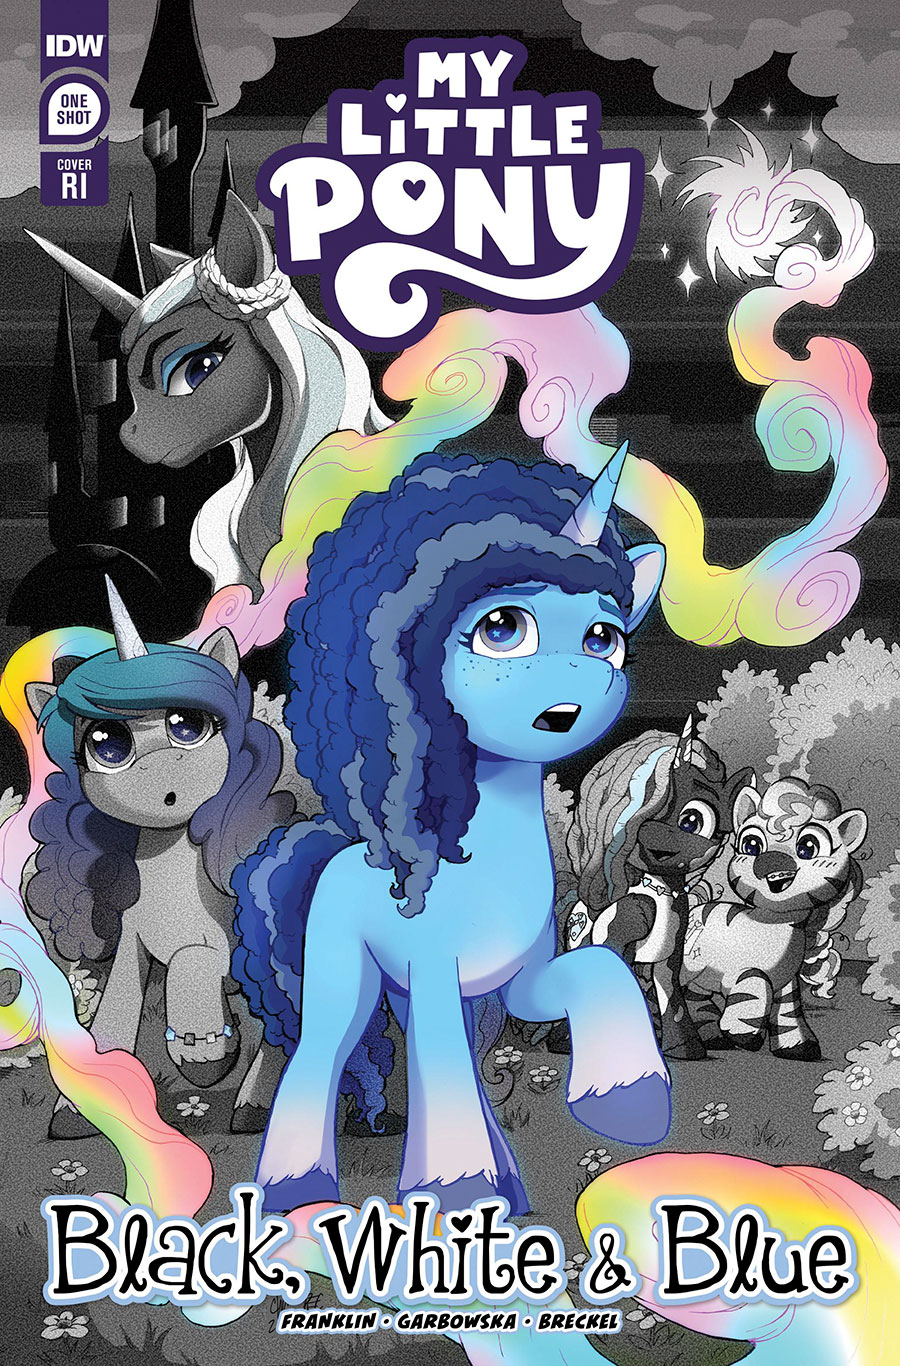 My Little Pony Black White & Blue #1 (One Shot) Cover D Incentive Casey Coller Variant Cover